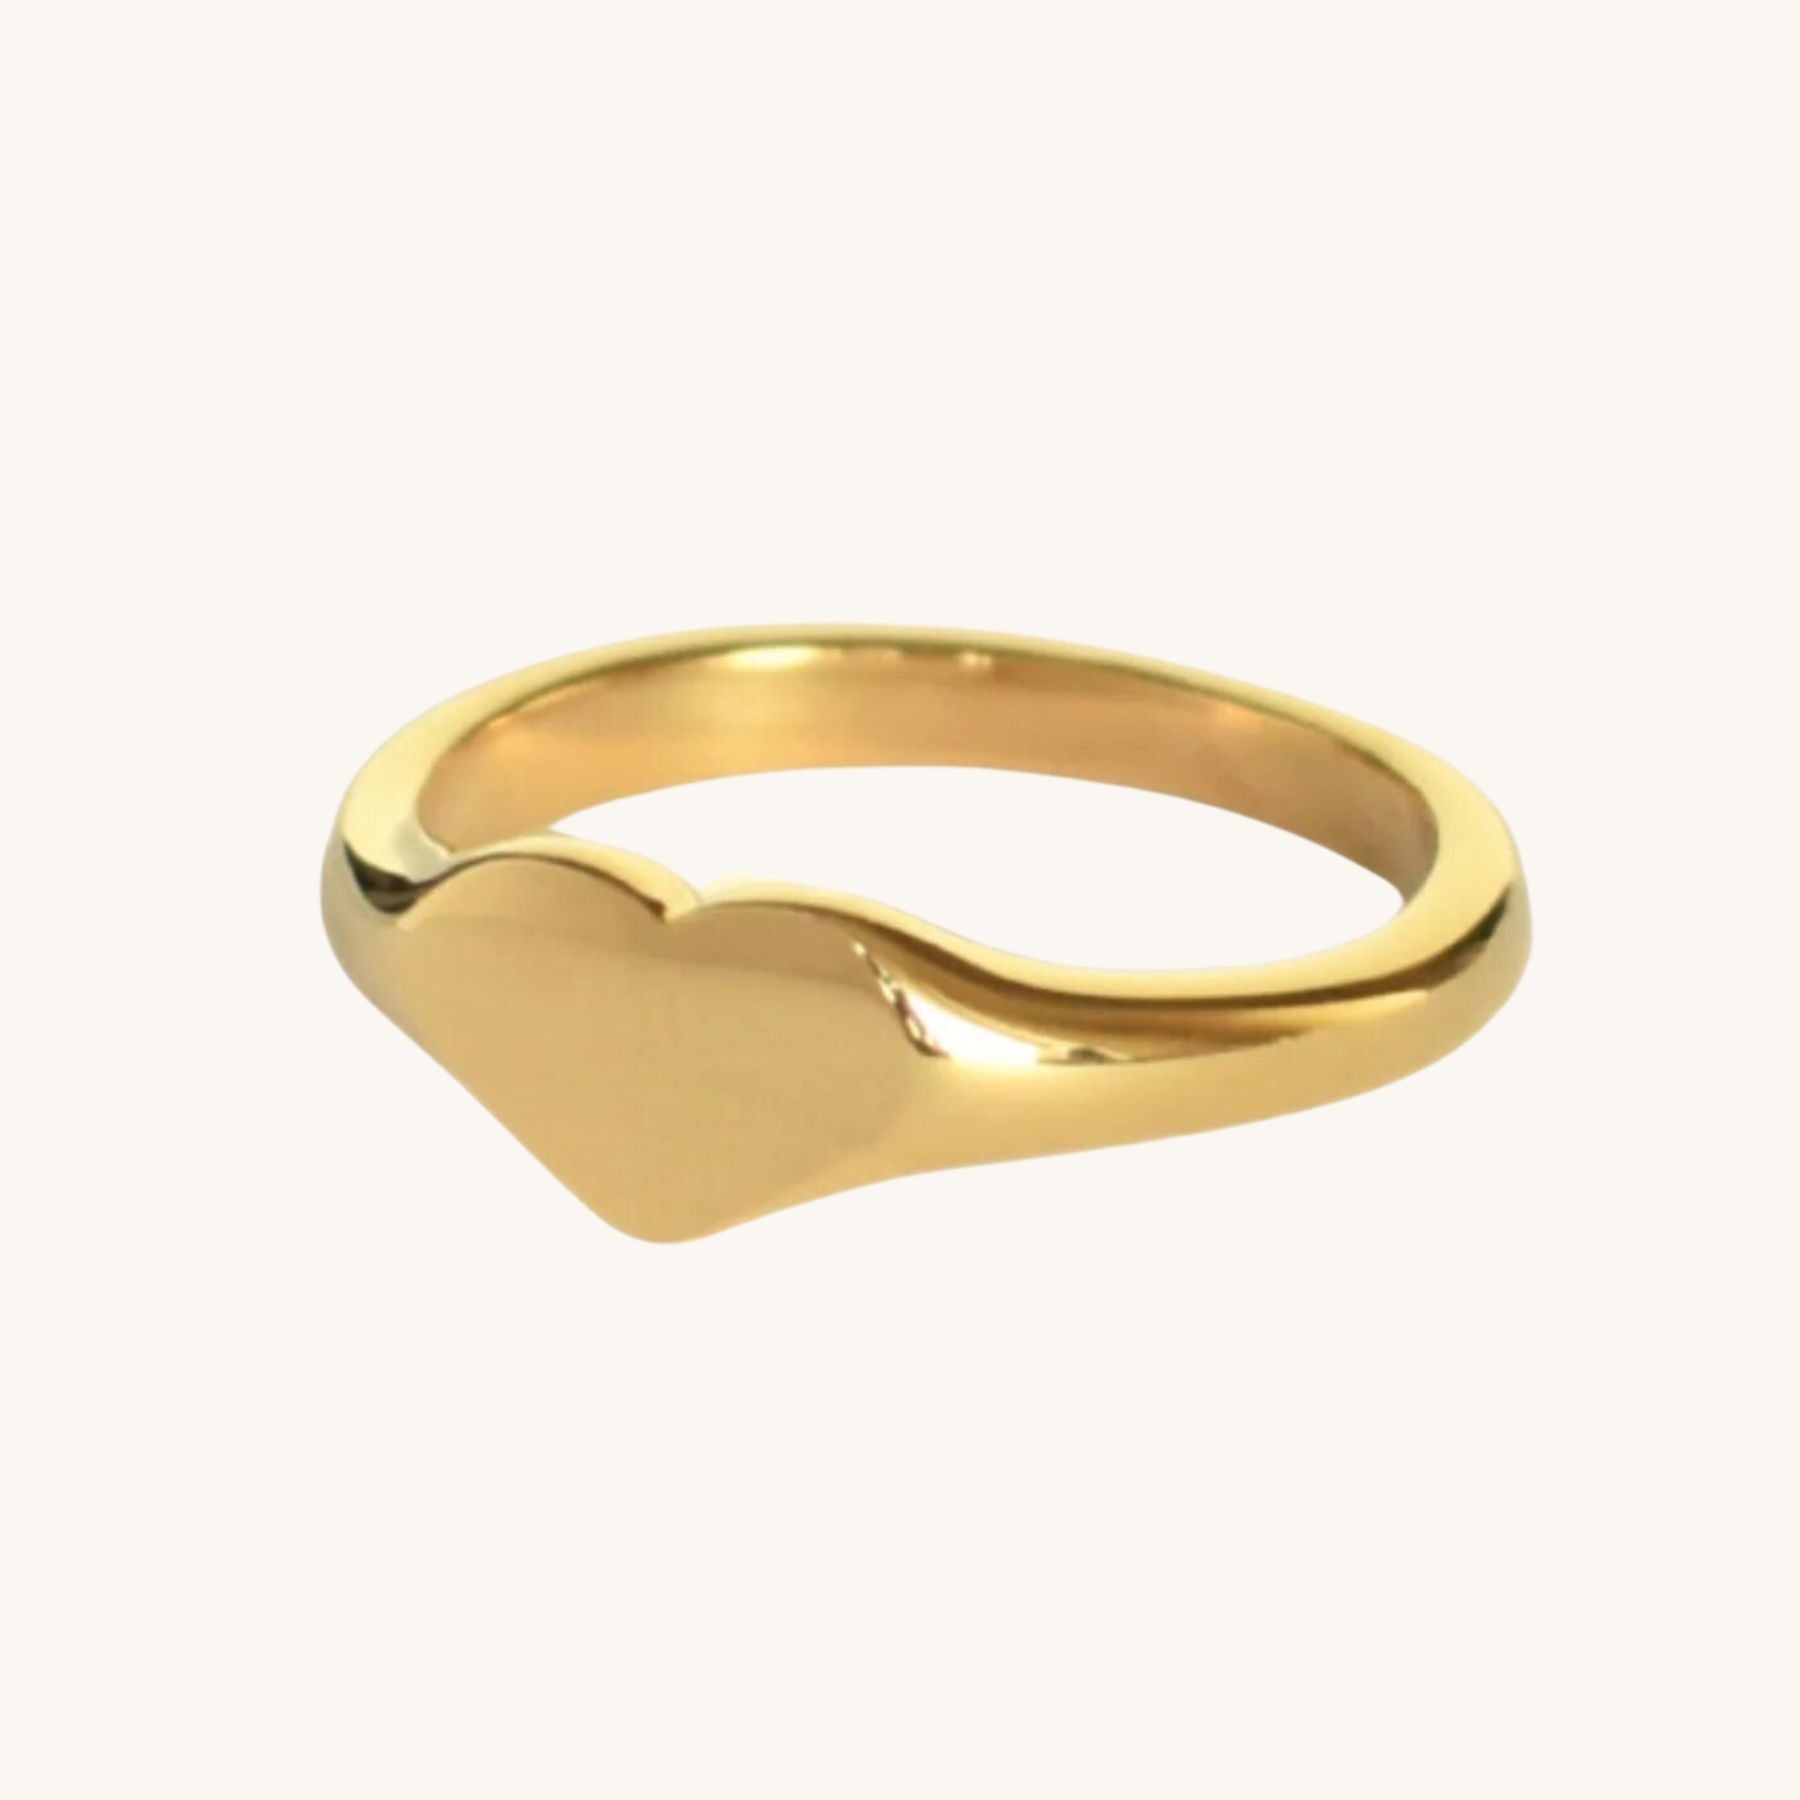 Small Heart Ring